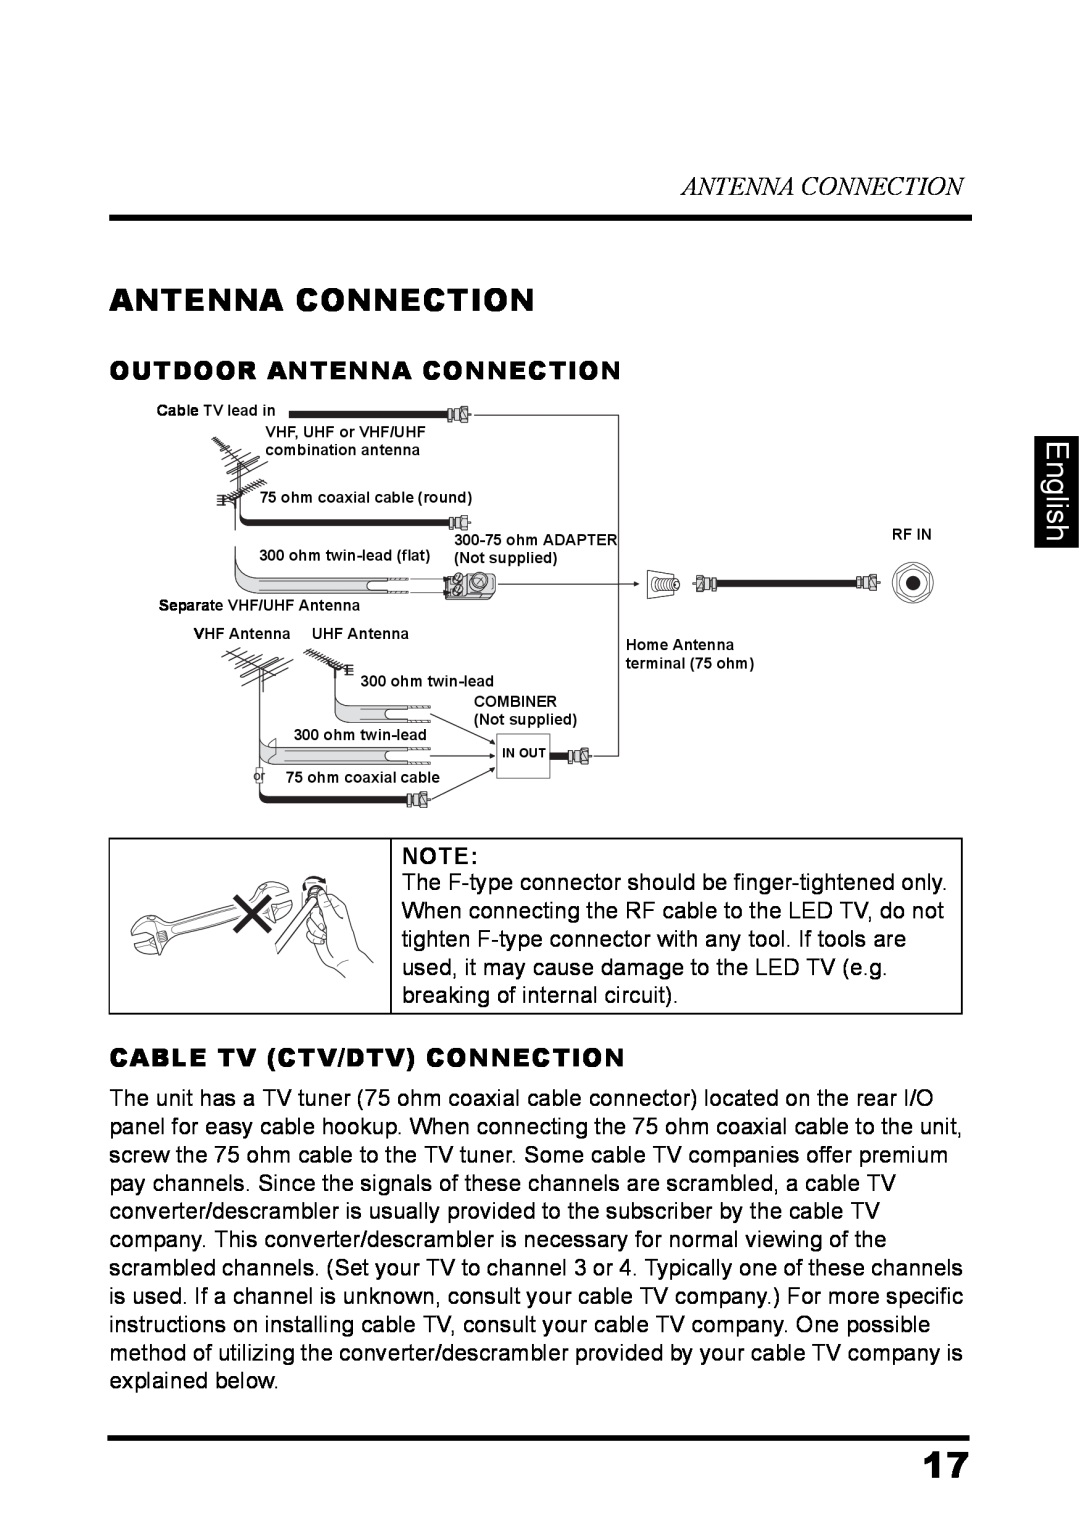 Westinghouse LD-3237 user manual English, Outdoor Antenna Connection, Cable Tv Ctv/Dtv Connection 